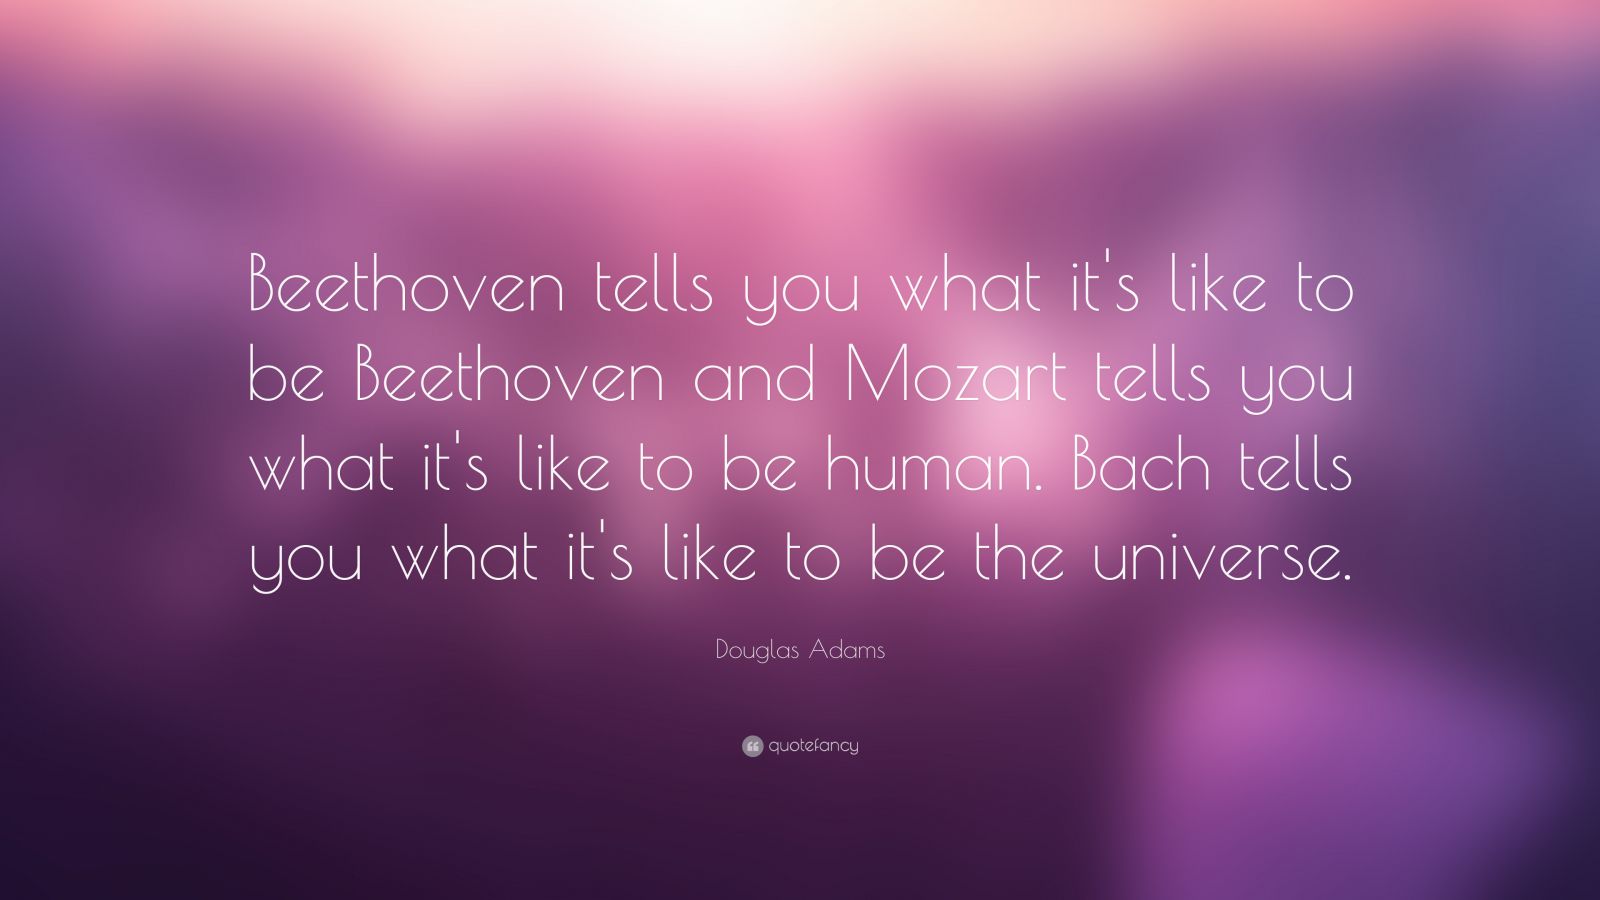 Douglas Adams Quote: “Beethoven tells you what it's like to be ...